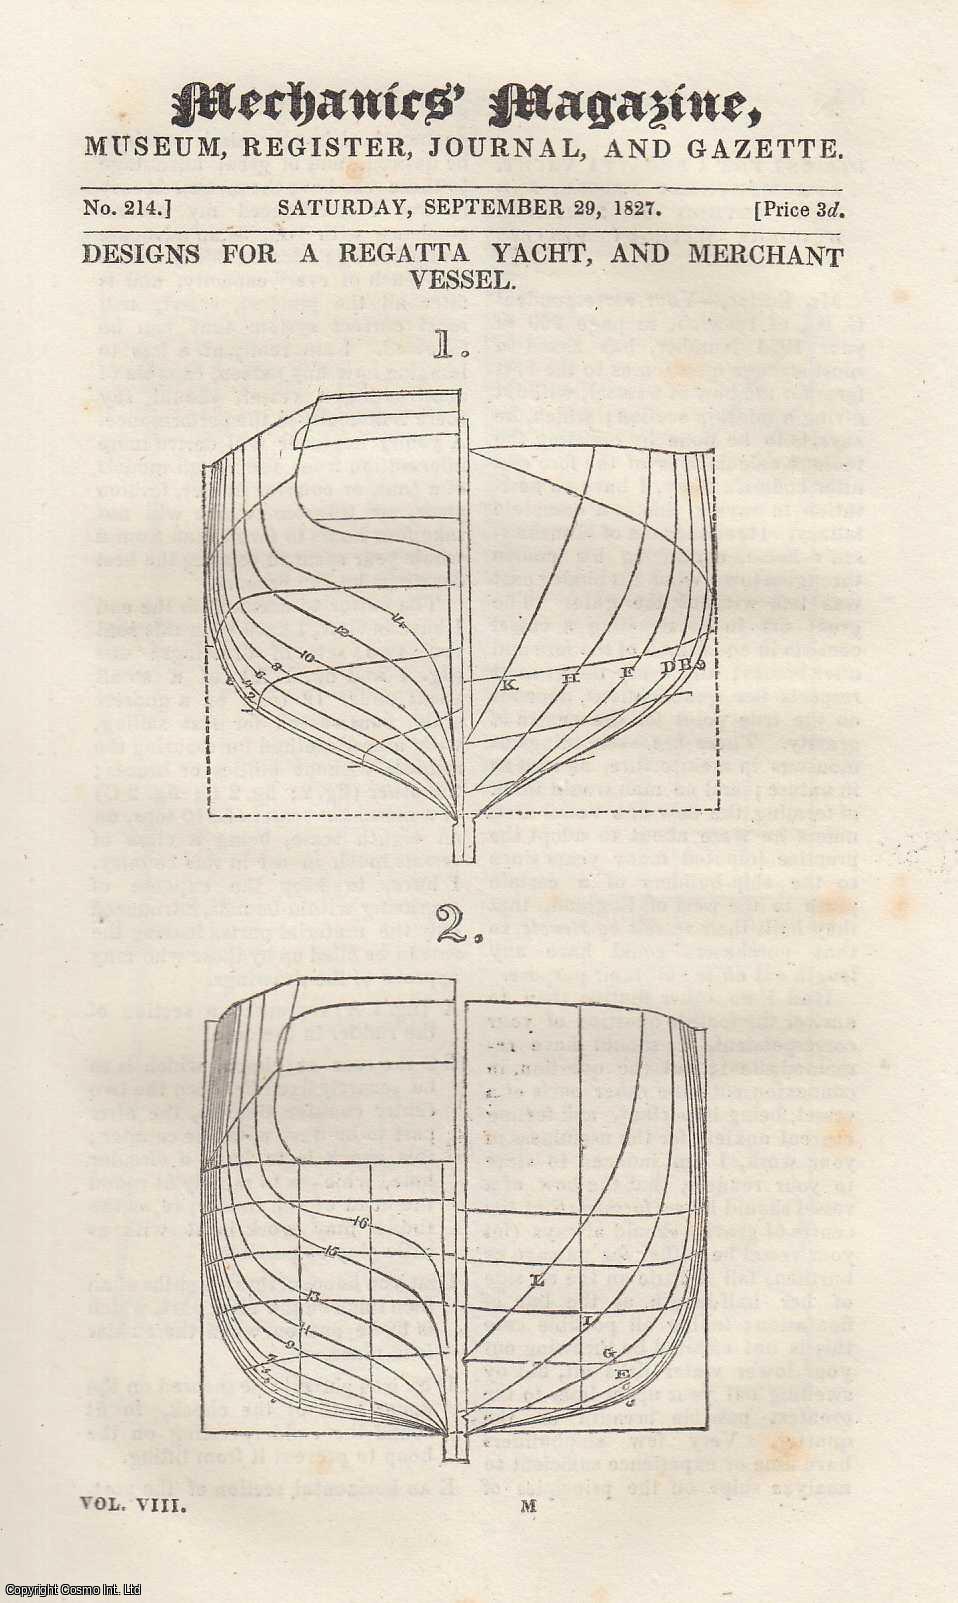 MECHANICS MAGAZINE - Designs For a Regatta Yacht, and Merchant Vessel; Improvement in Steam-Boats; Method For Finding The Height of a Balloon by Sound, etc. Mechanics Magazine, Museum, Register, Journal and Gazette. Issue No. 214. A complete rare weekly issue of the Mechanics' Magazine, 1827.